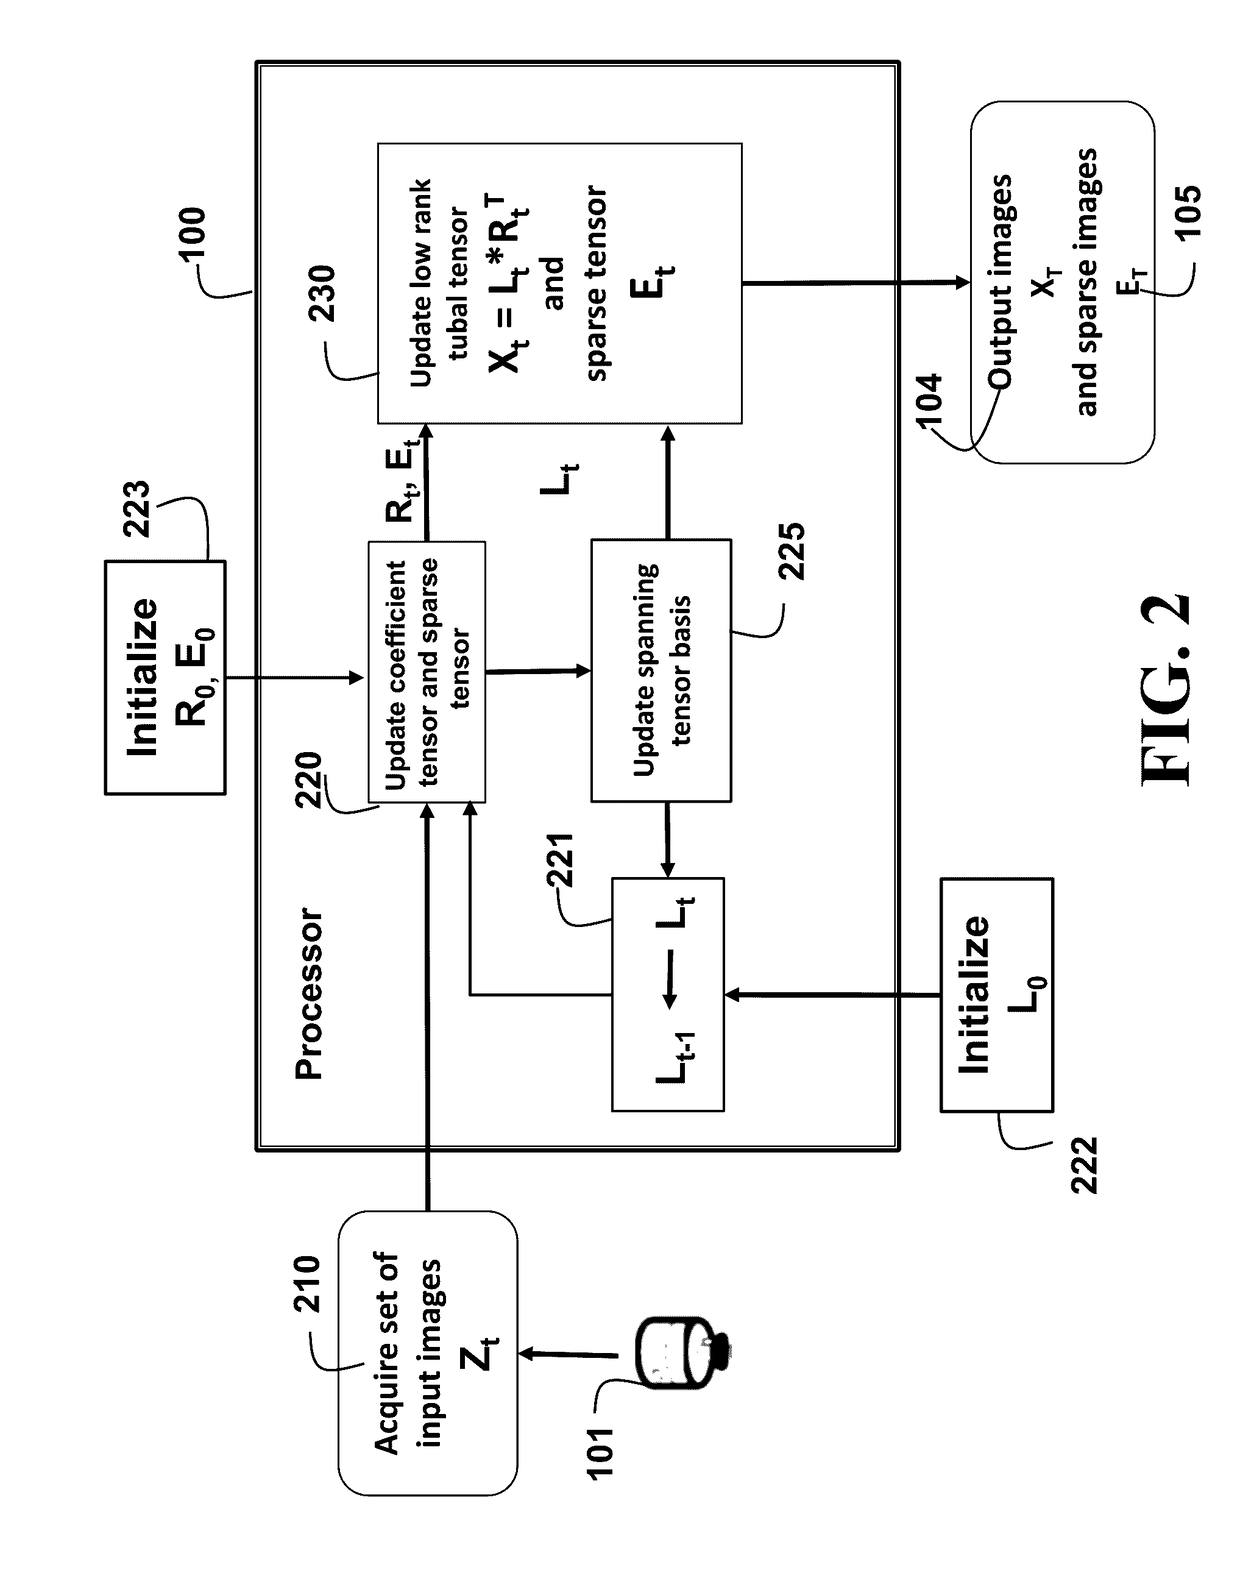 System and Method for Processing Images using Online Tensor Robust Principal Component Analysis